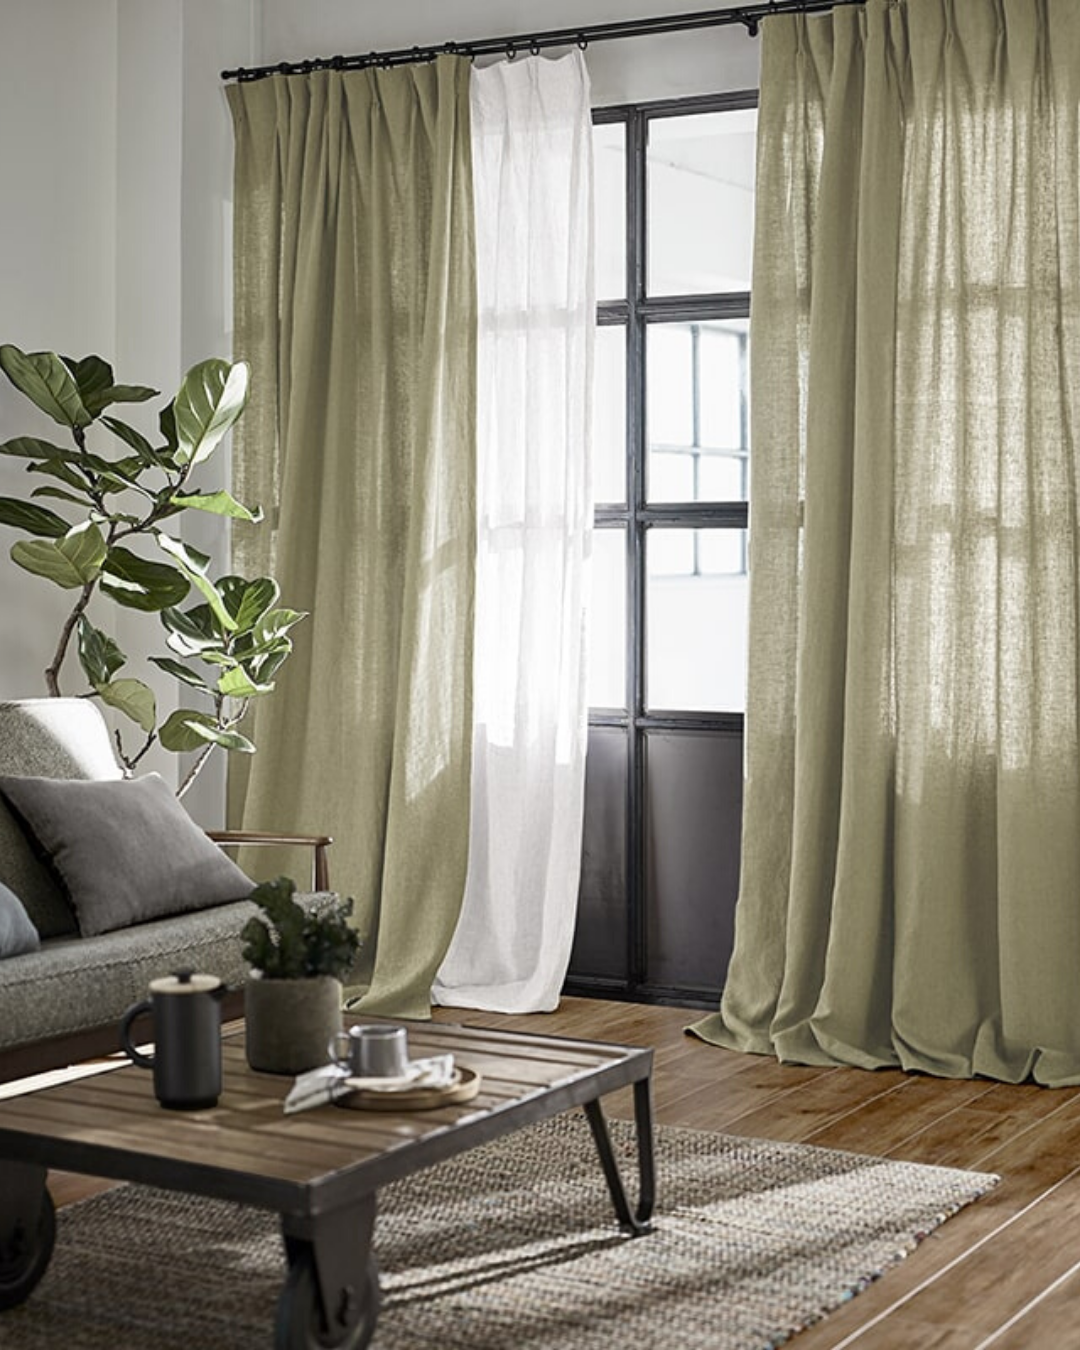 Dry Sage linen curtains, sheer drapes - 1 panel